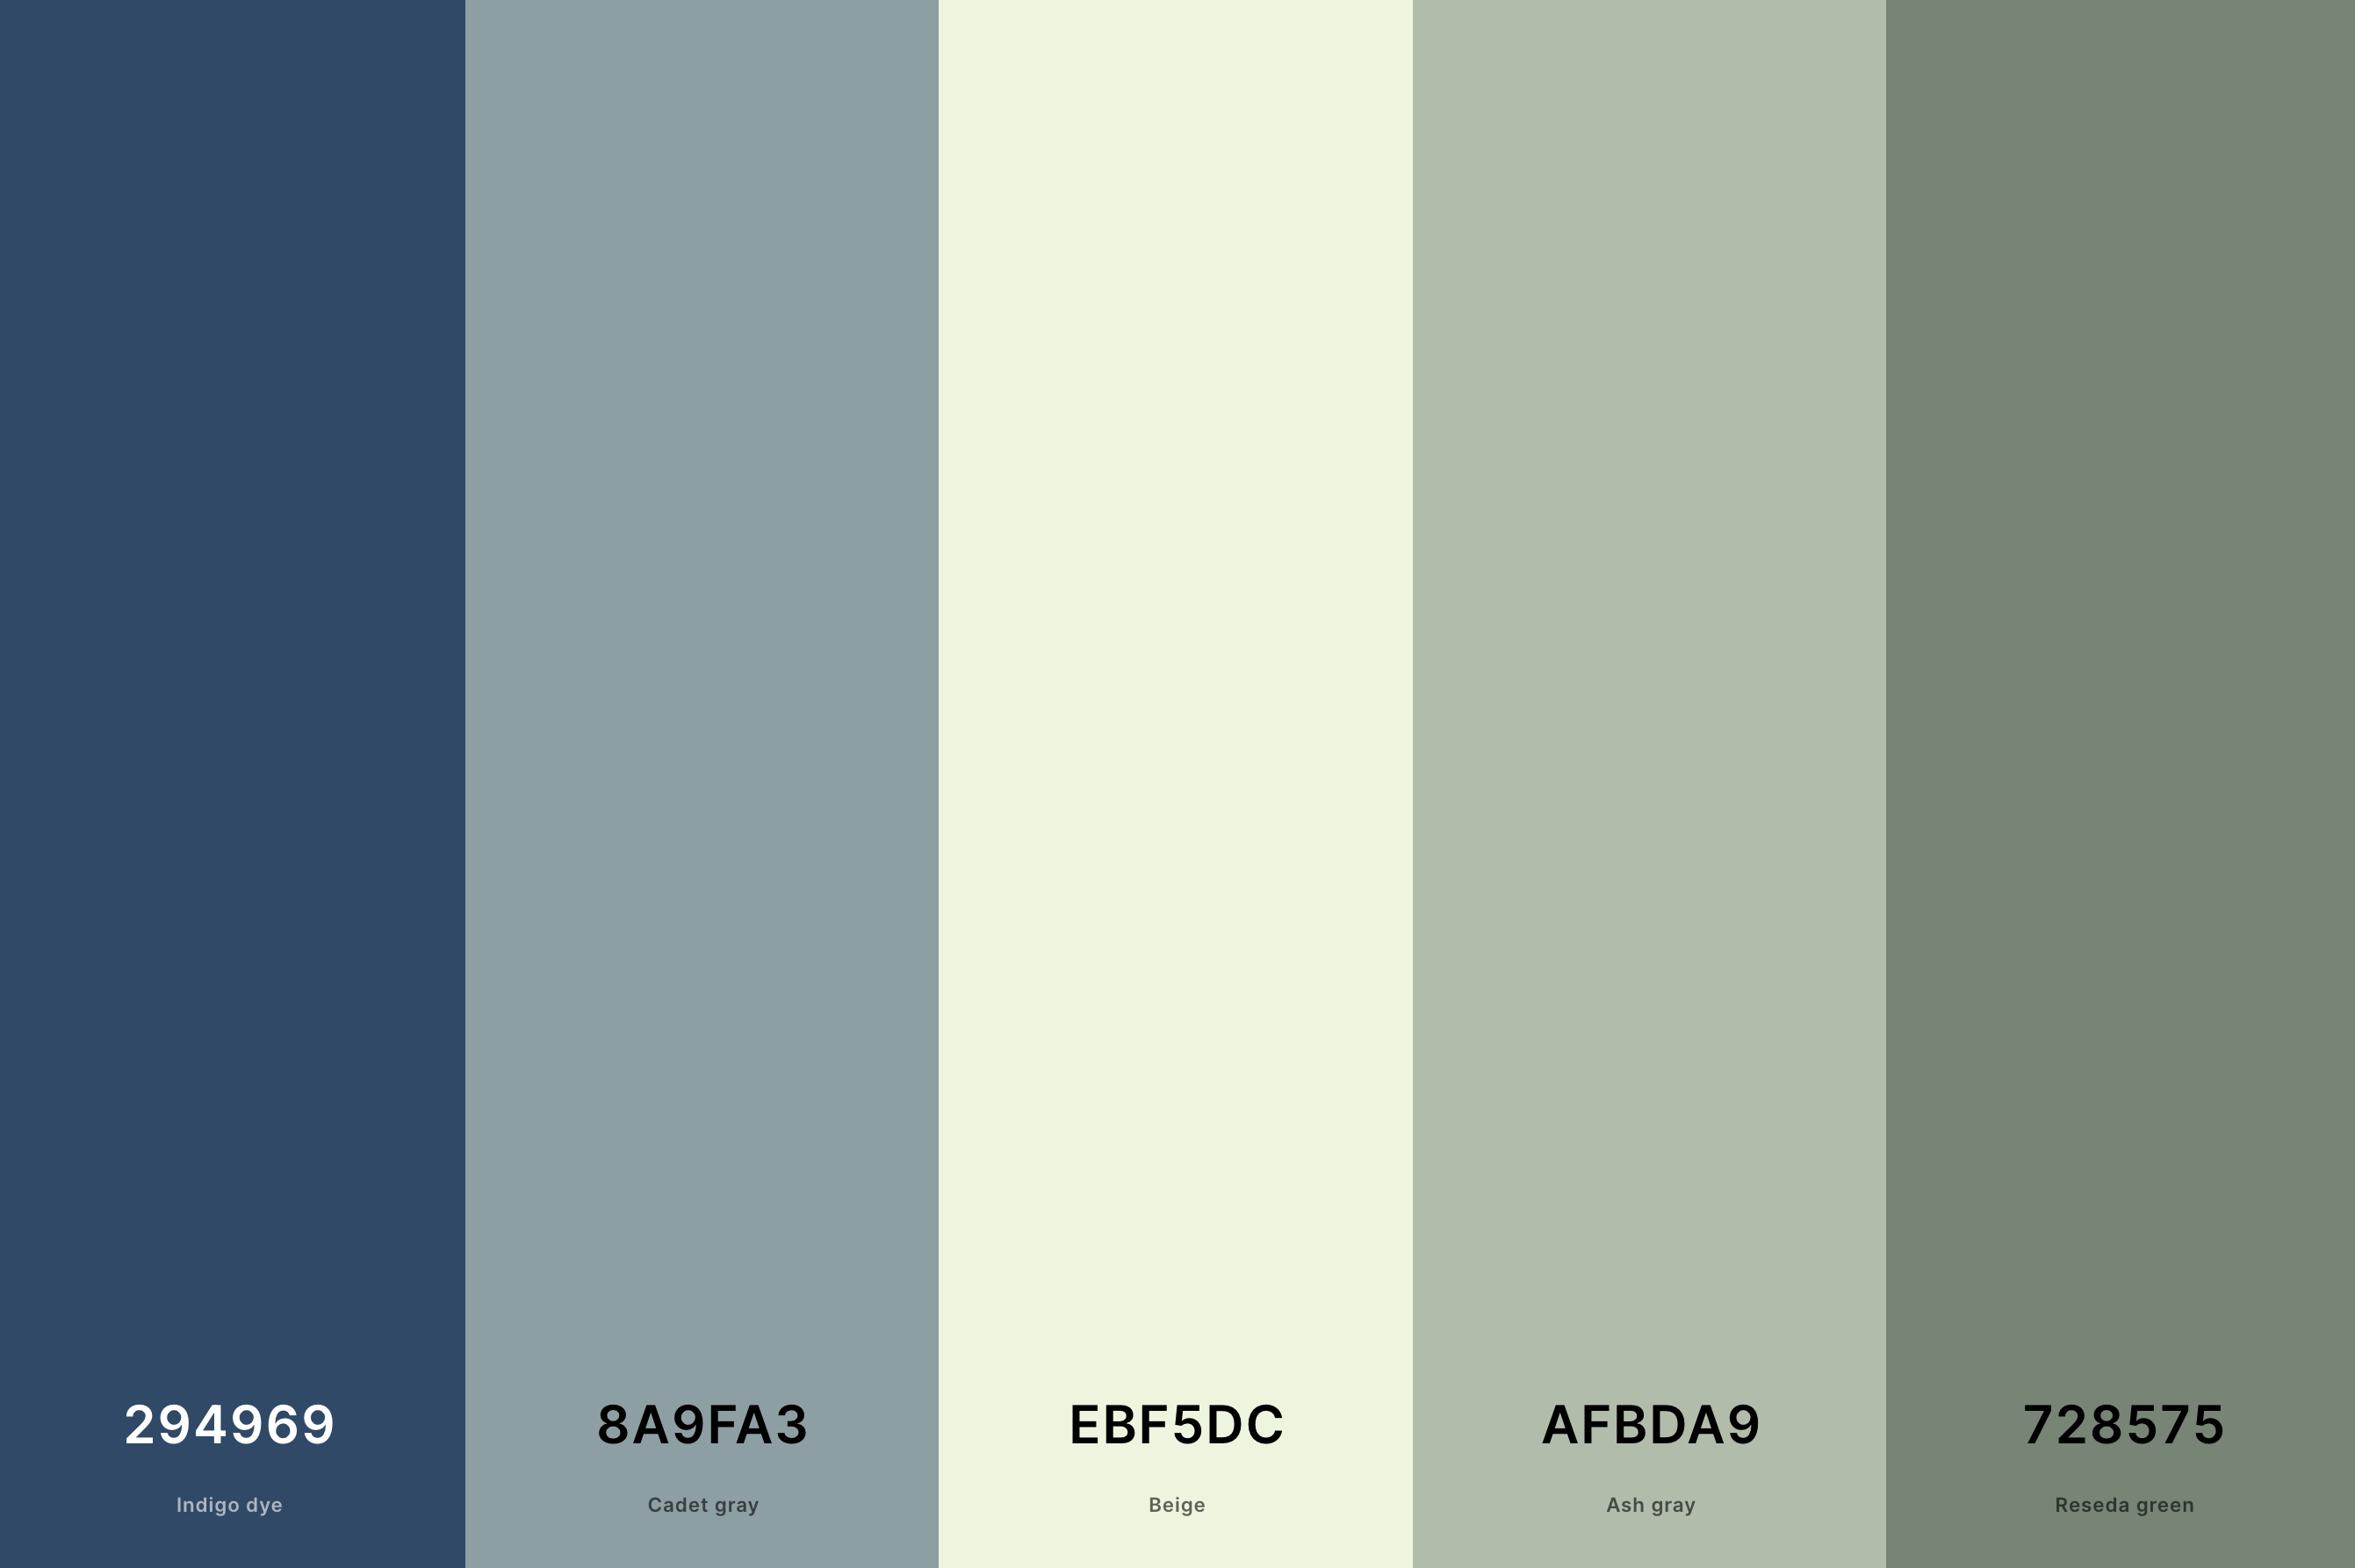 27. Cool Beige Color Palette Color Palette with Indigo Dye (Hex #294969) + Cadet Gray (Hex #8A9FA3) + Beige (Hex #EBF5DC) + Ash Gray (Hex #AFBDA9) + Reseda Green (Hex #728575) Color Palette with Hex Codes